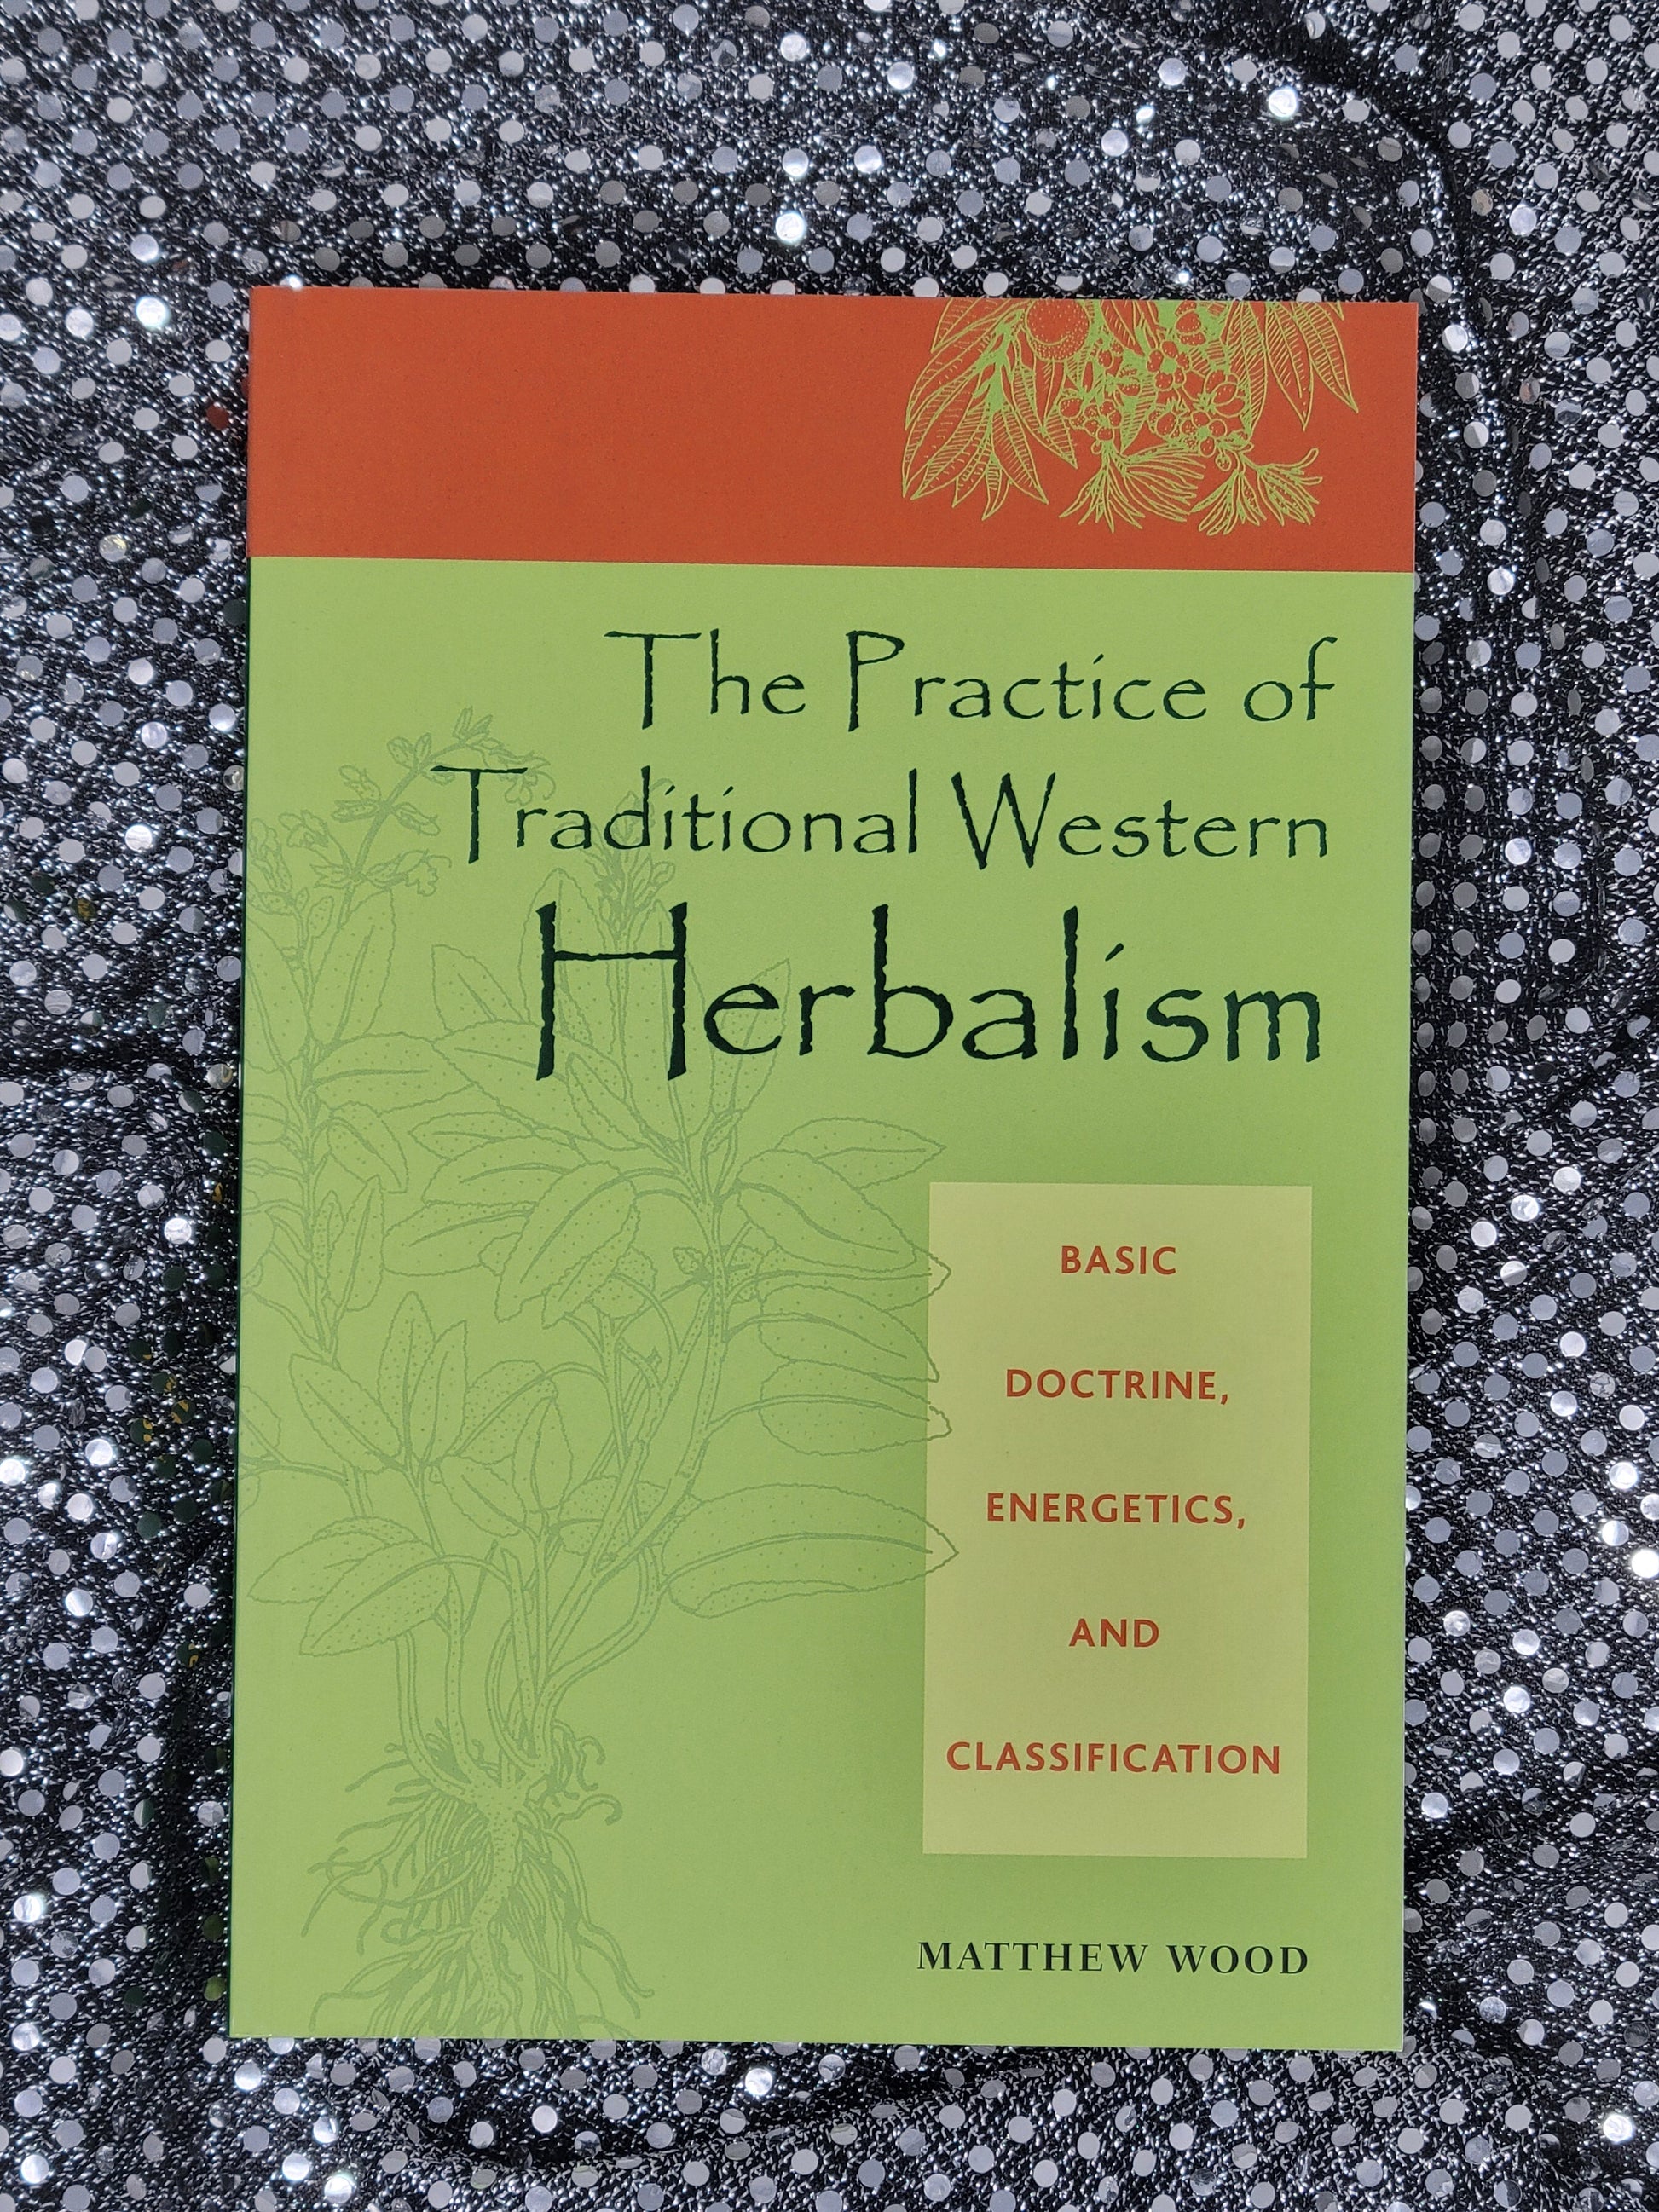 The Practice of Traditional Western Herbalism BASIC DOCTRINE, ENERGETICS, AND CLASSIFICATION - By MATTHEW WOOD